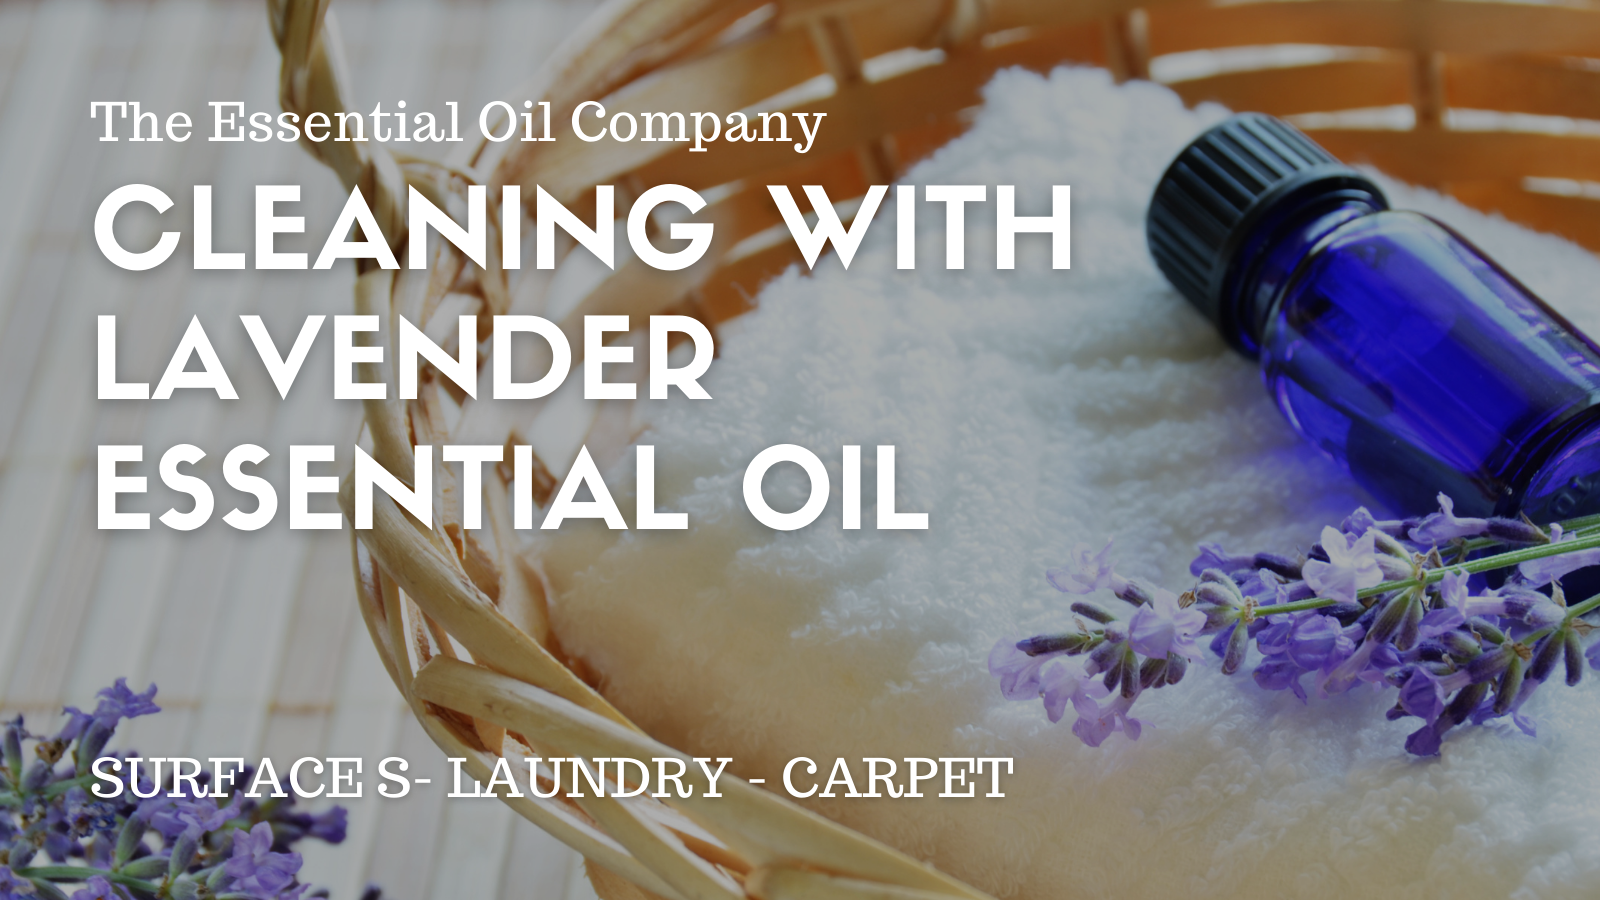 Cleaning with lavender essential oil